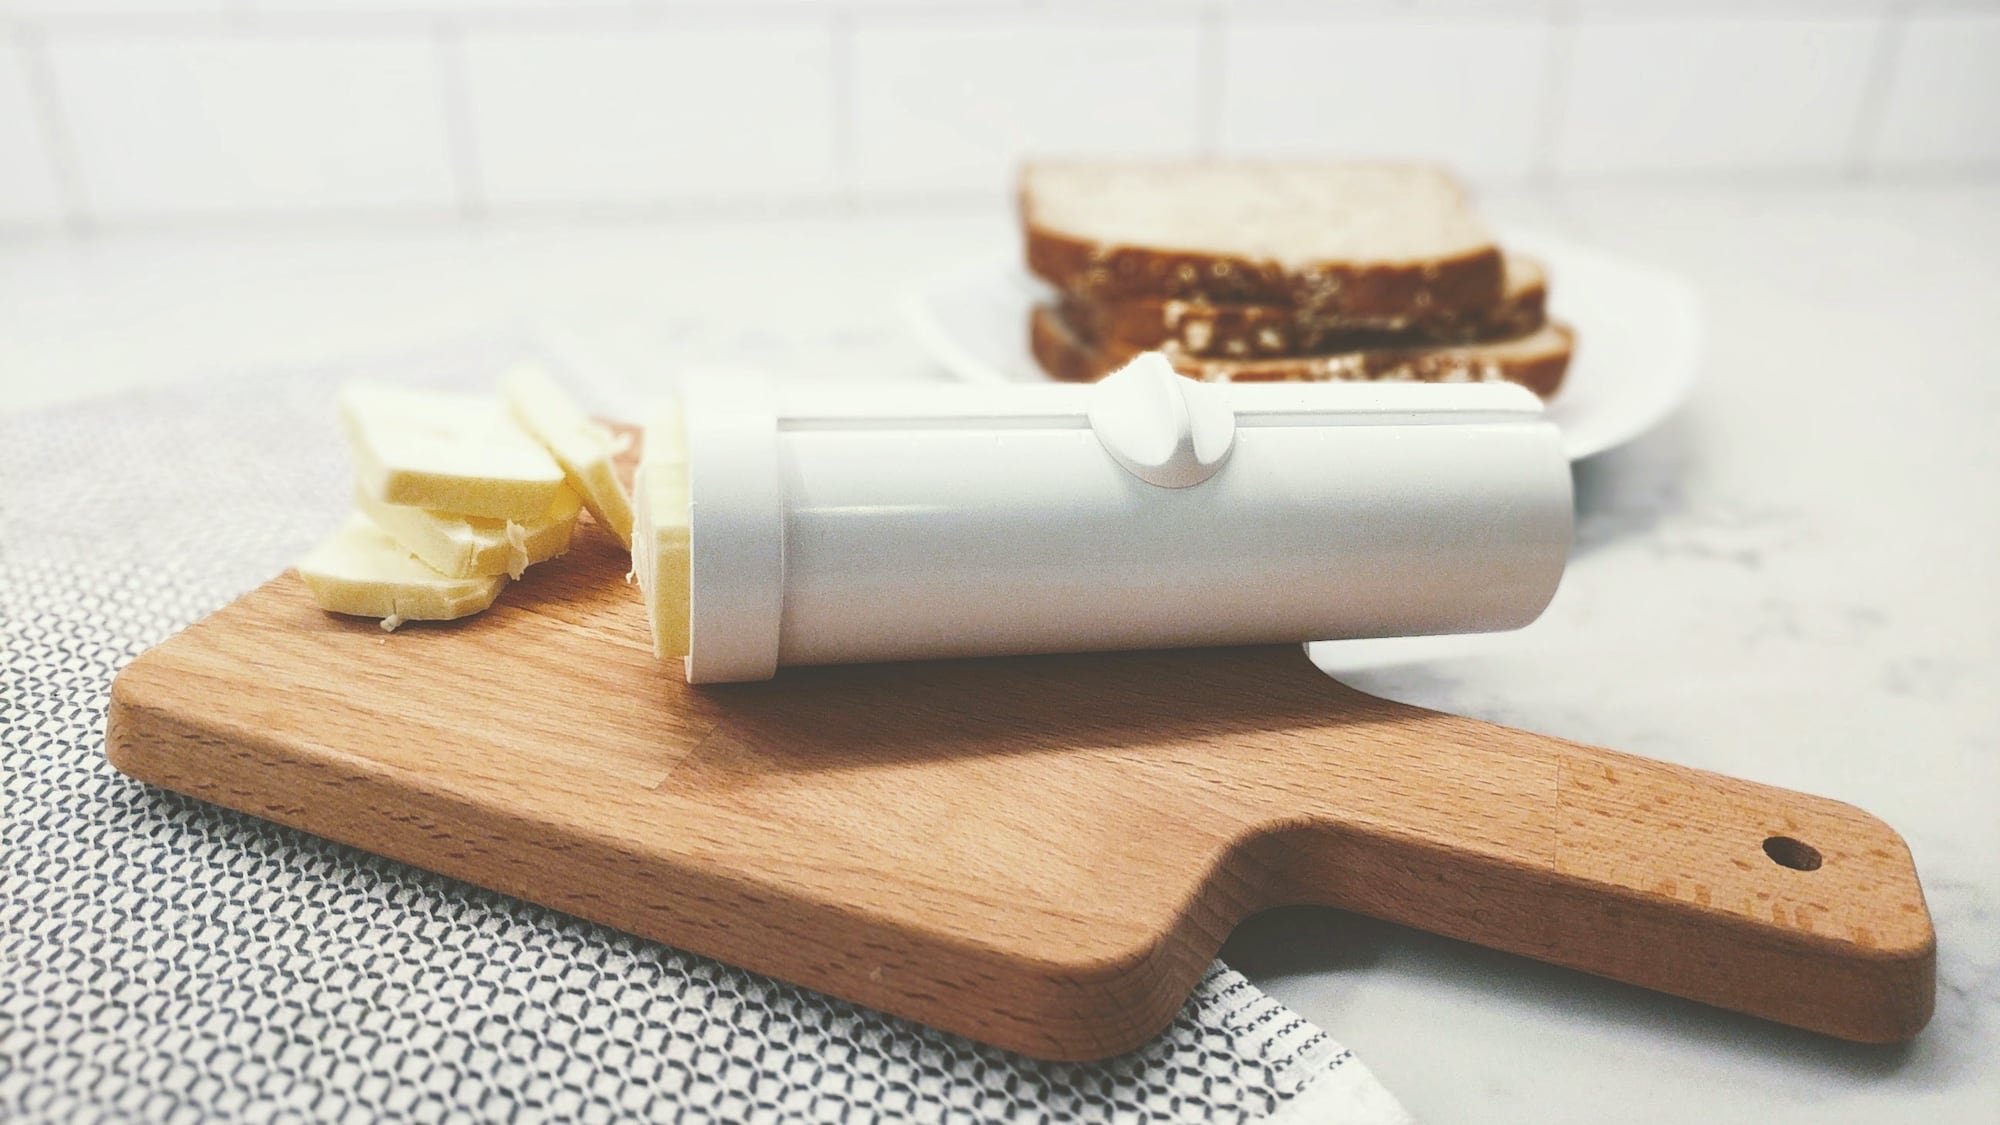 Butter Twist All-in-One Butter Tool makes it so much easier to cook with butter